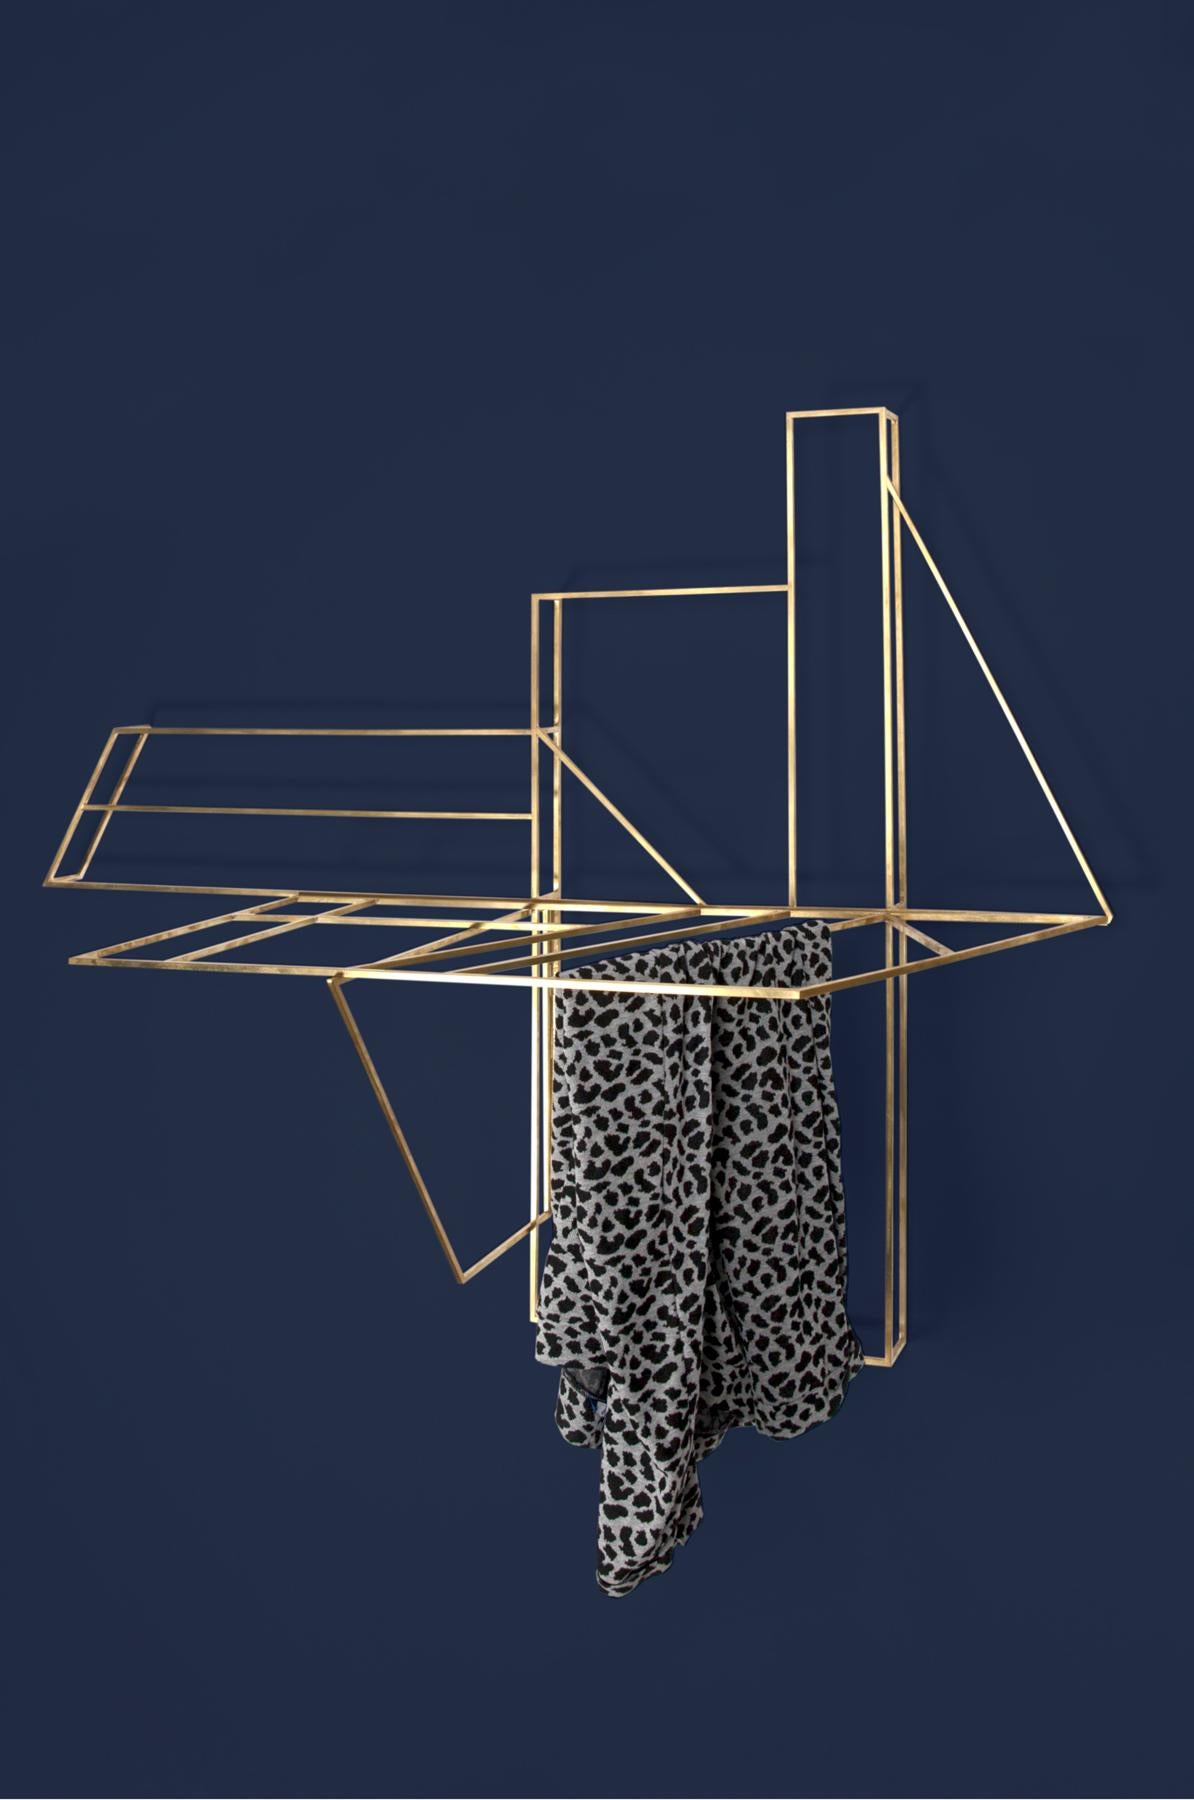 The FOLDWORK RACK is a crossbreed between a wall piece, inspired by half-timbered constructions, and a clothes horse. It hangs on the wall and can be unfolded to provide more space for the laundry. The initial idea for the FOLDWORK collection was to